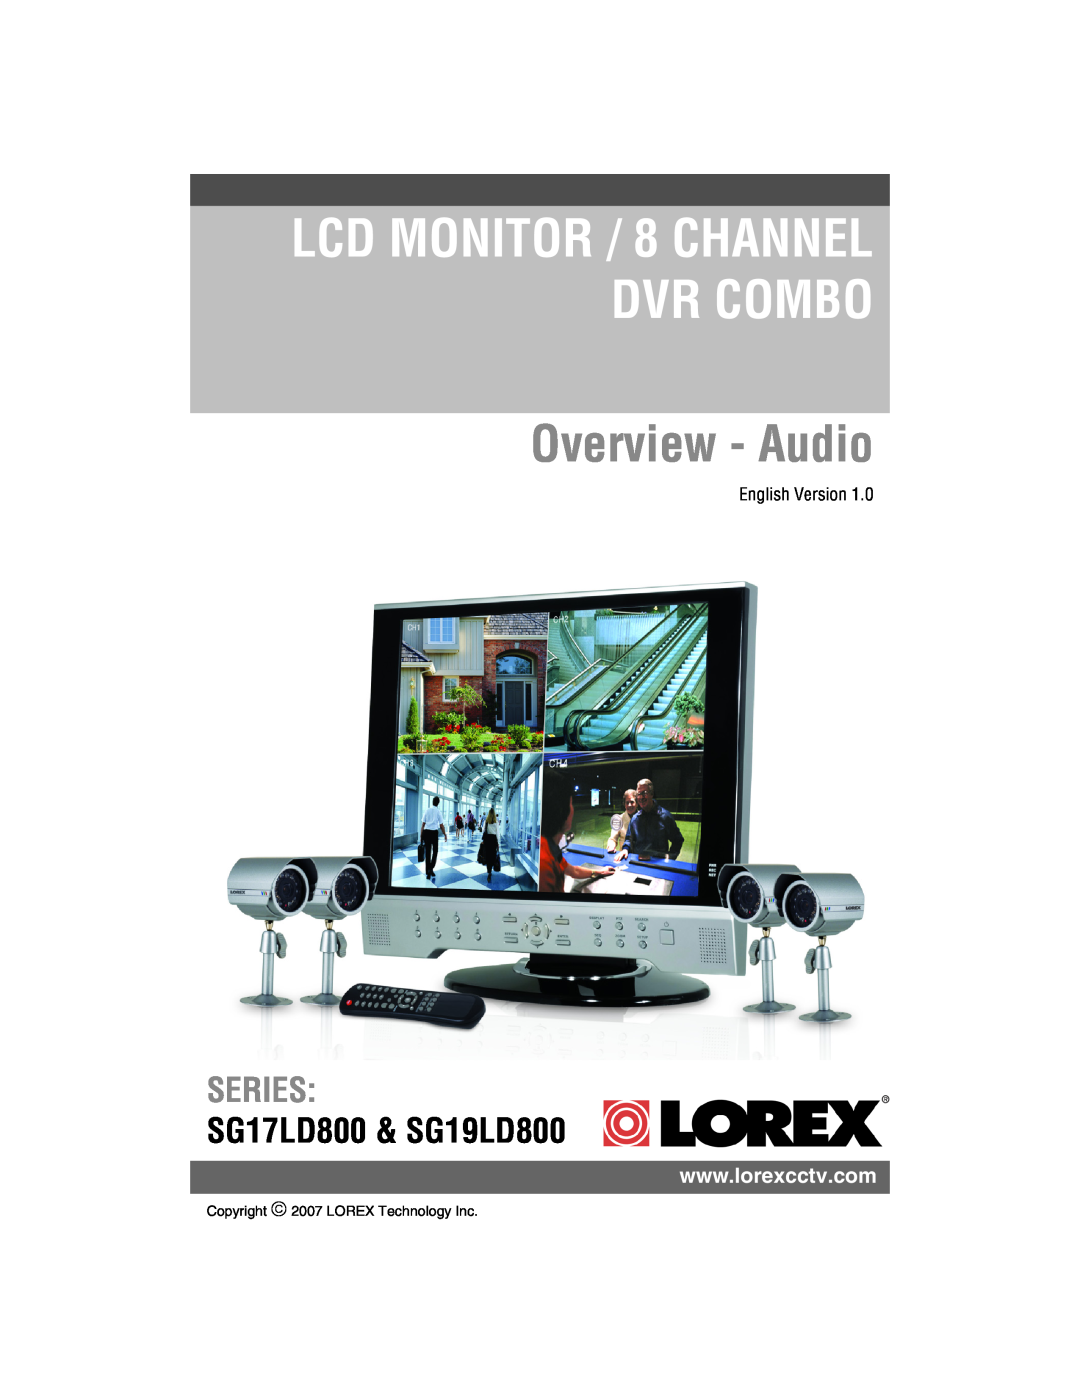 LOREX Technology manual Overview - Audio, LCD MONITOR / 8 CHANNEL DVR COMBO, Series, SG17LD800 & SG19LD800 